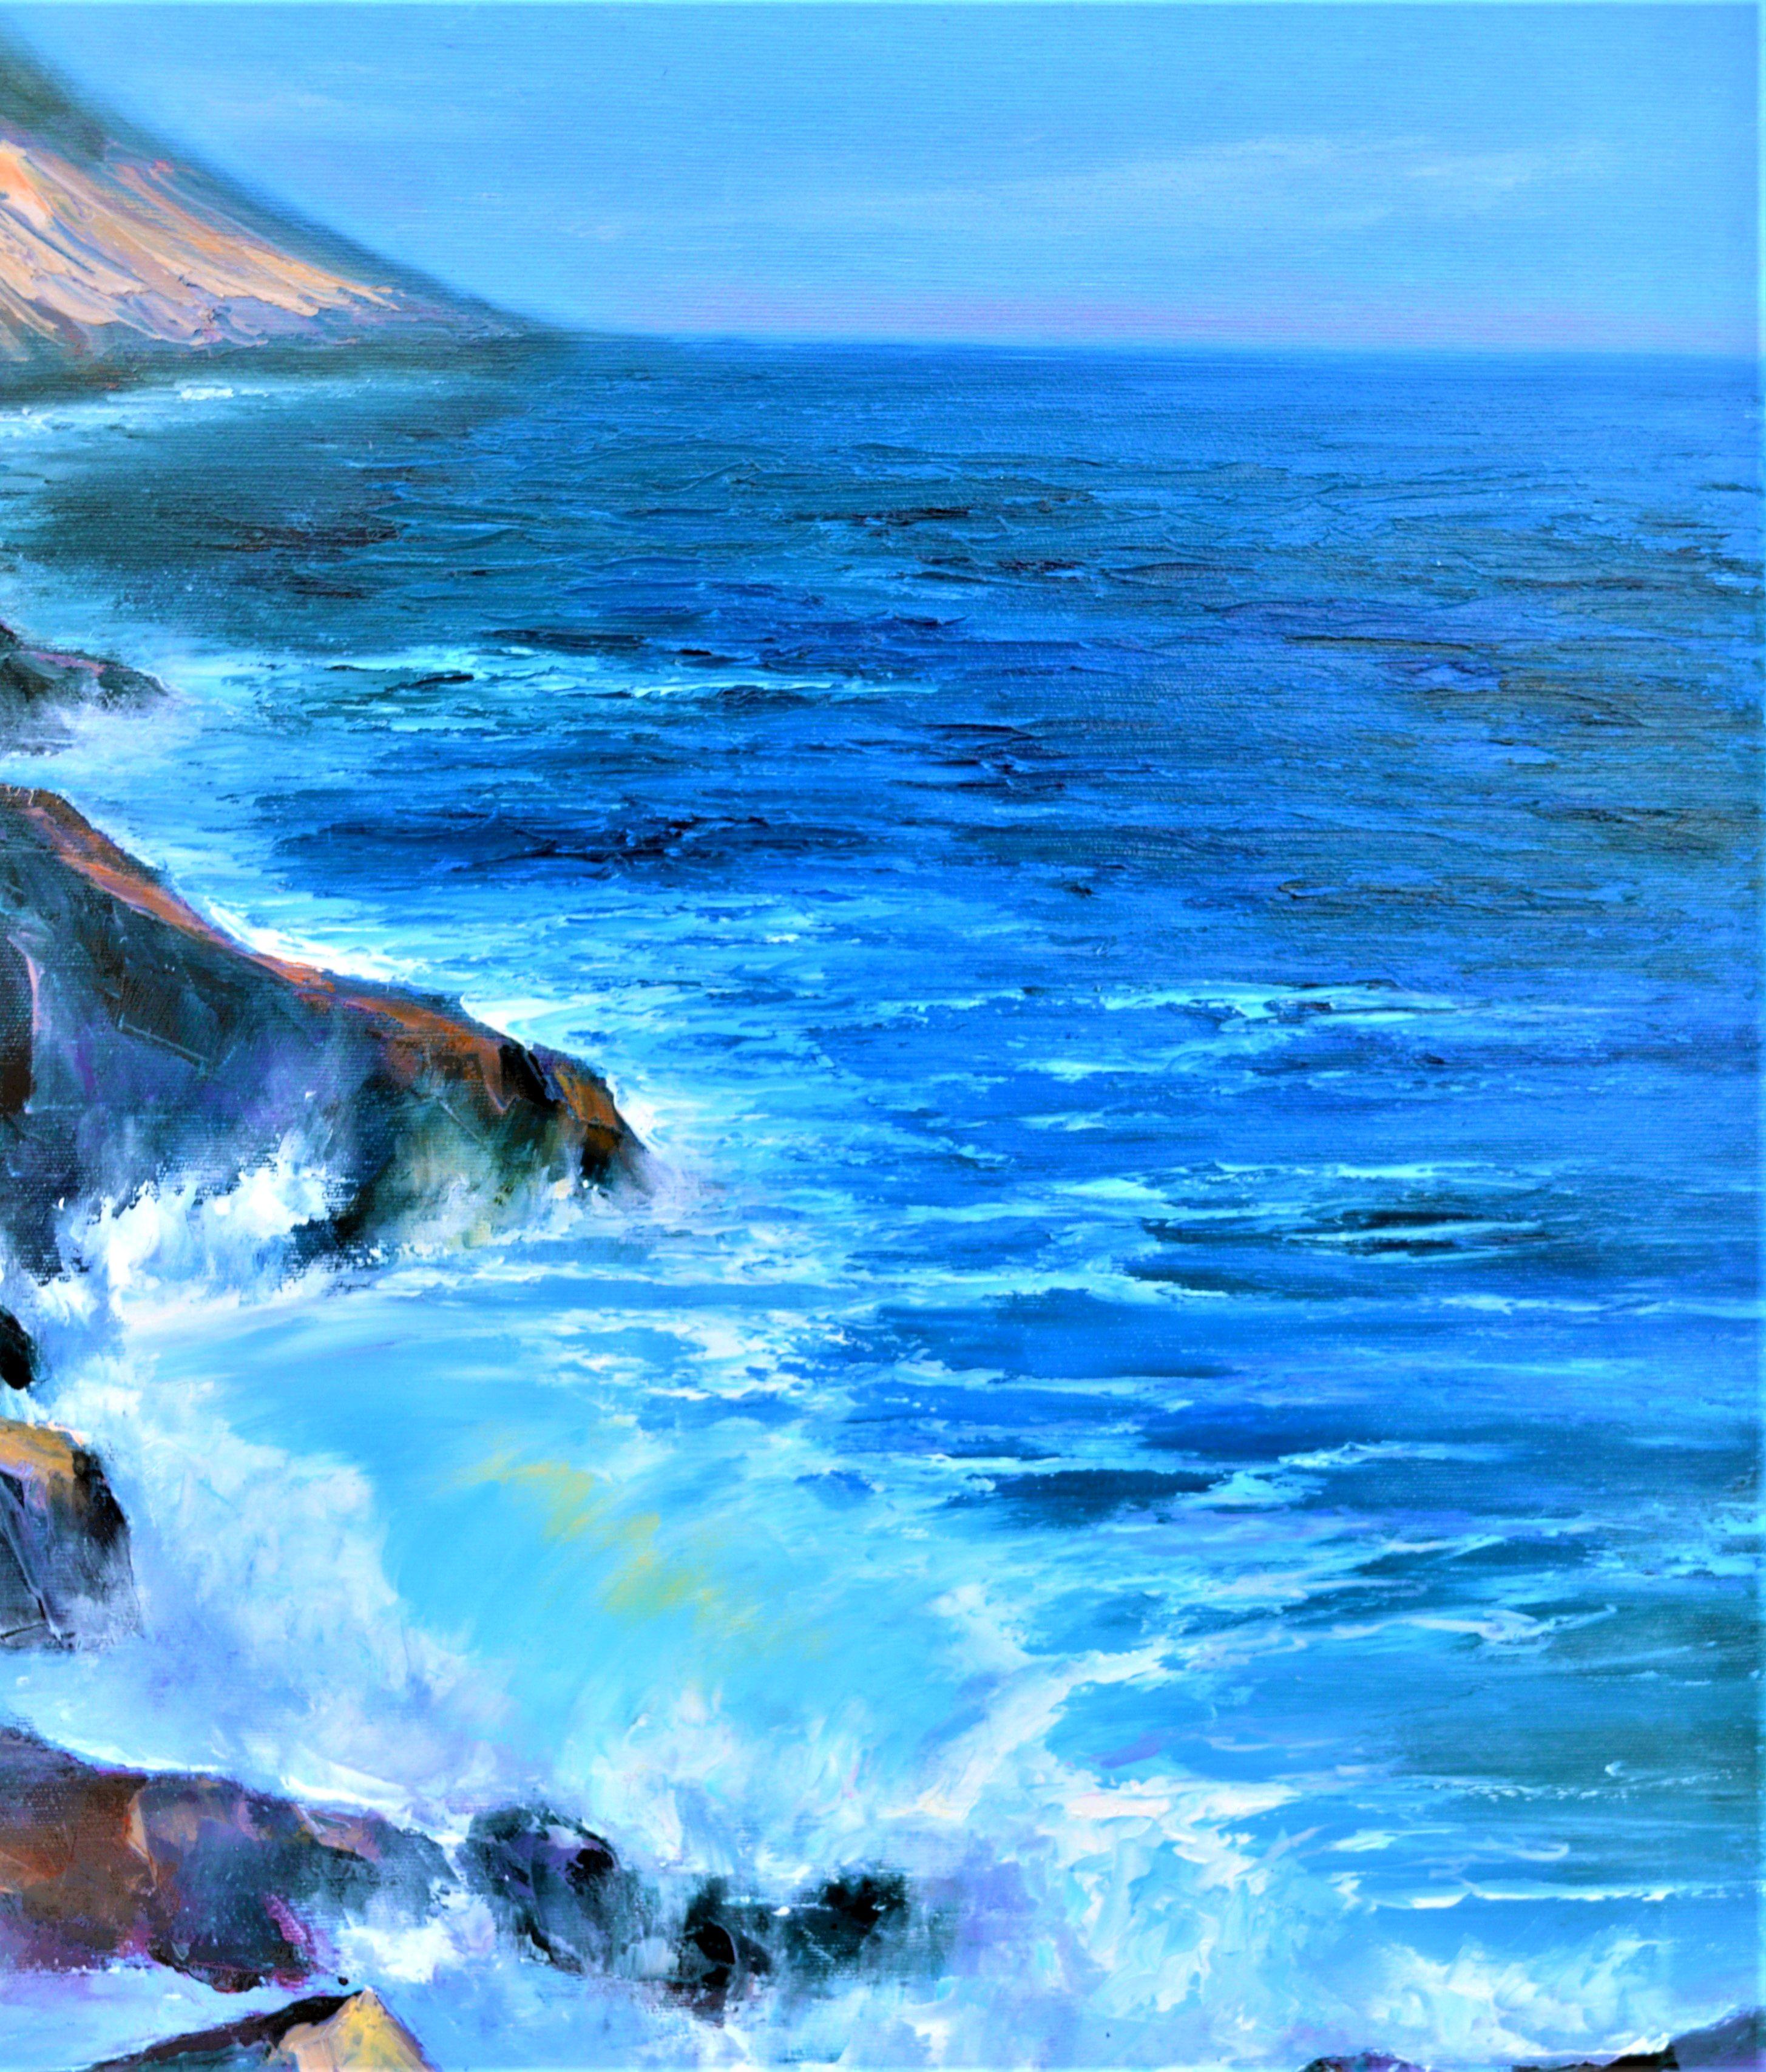 In my artwork, I've poured the vitality and serenity of the sea onto canvas, capturing the dynamic dance between water and land. The interplay of light reflects the boundless energy and the moods of the ocean, with each brushstroke expressing its